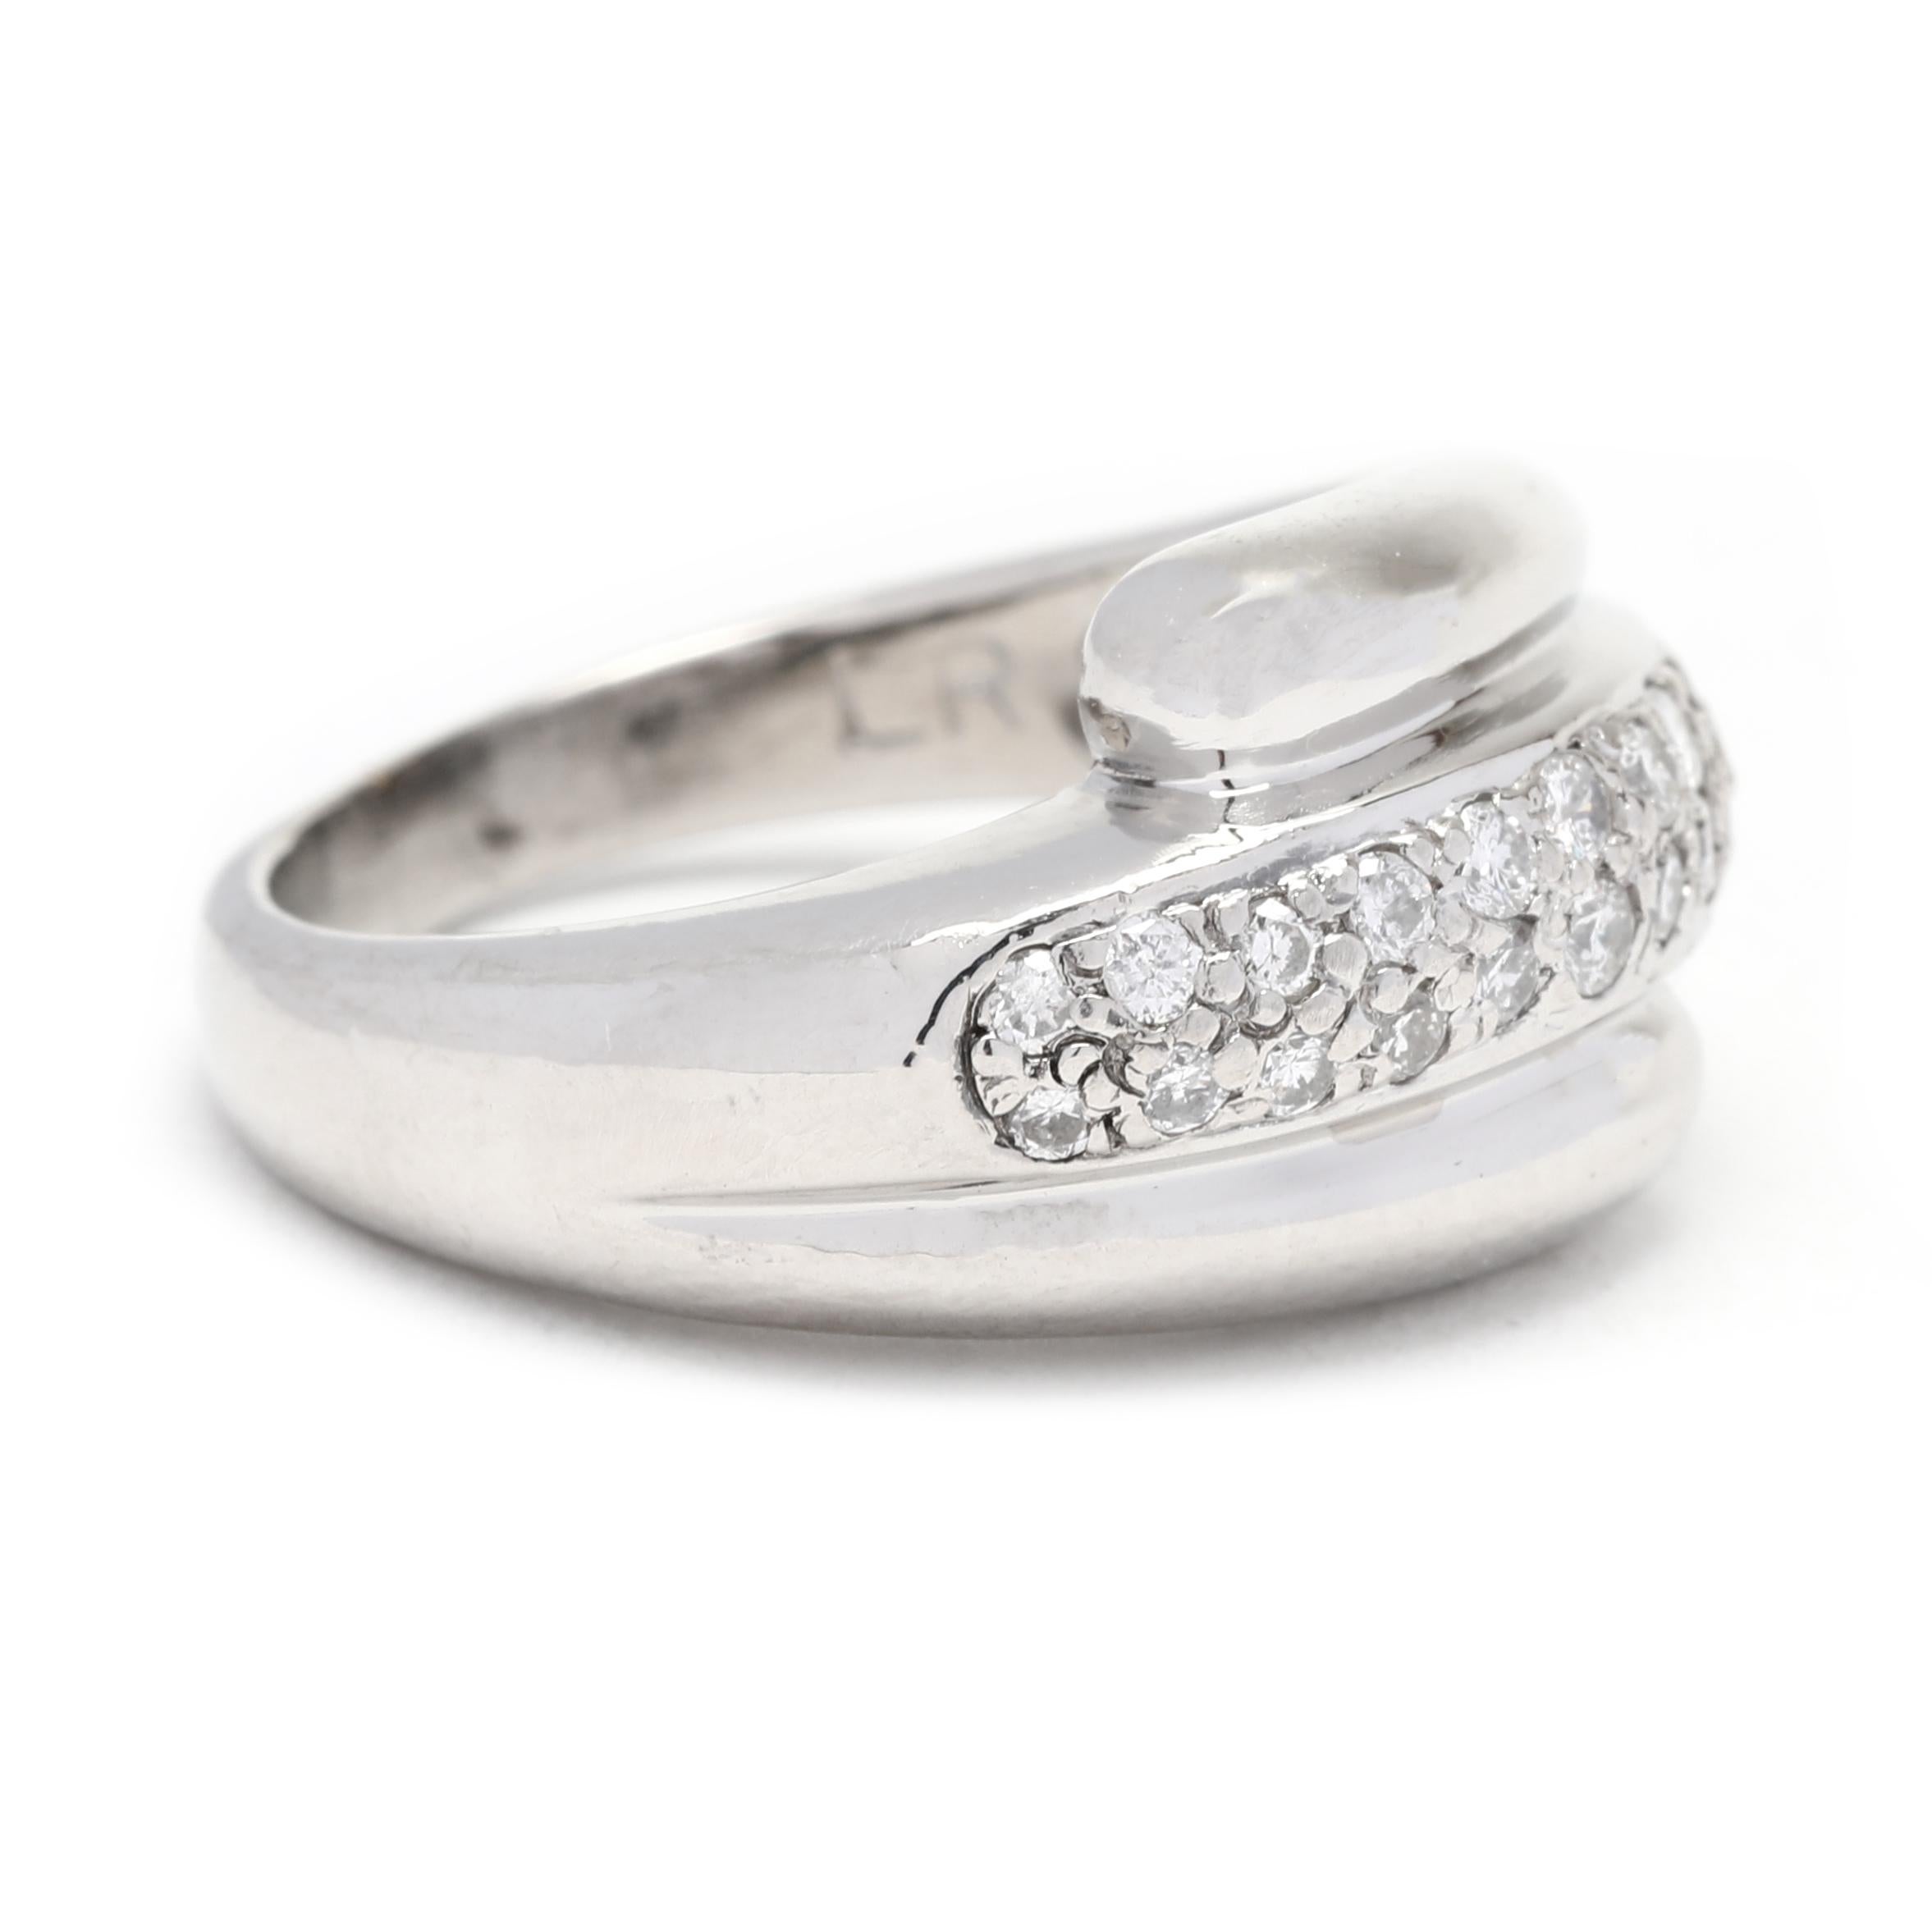 This beautiful 0.35ctw diamond bypass dome ring is set in platinum and designed to make a statement. Featuring a bypass dome shape with a diamond-studded band, this exquisite ring is perfect for everyday wear or special occasions. The diamonds